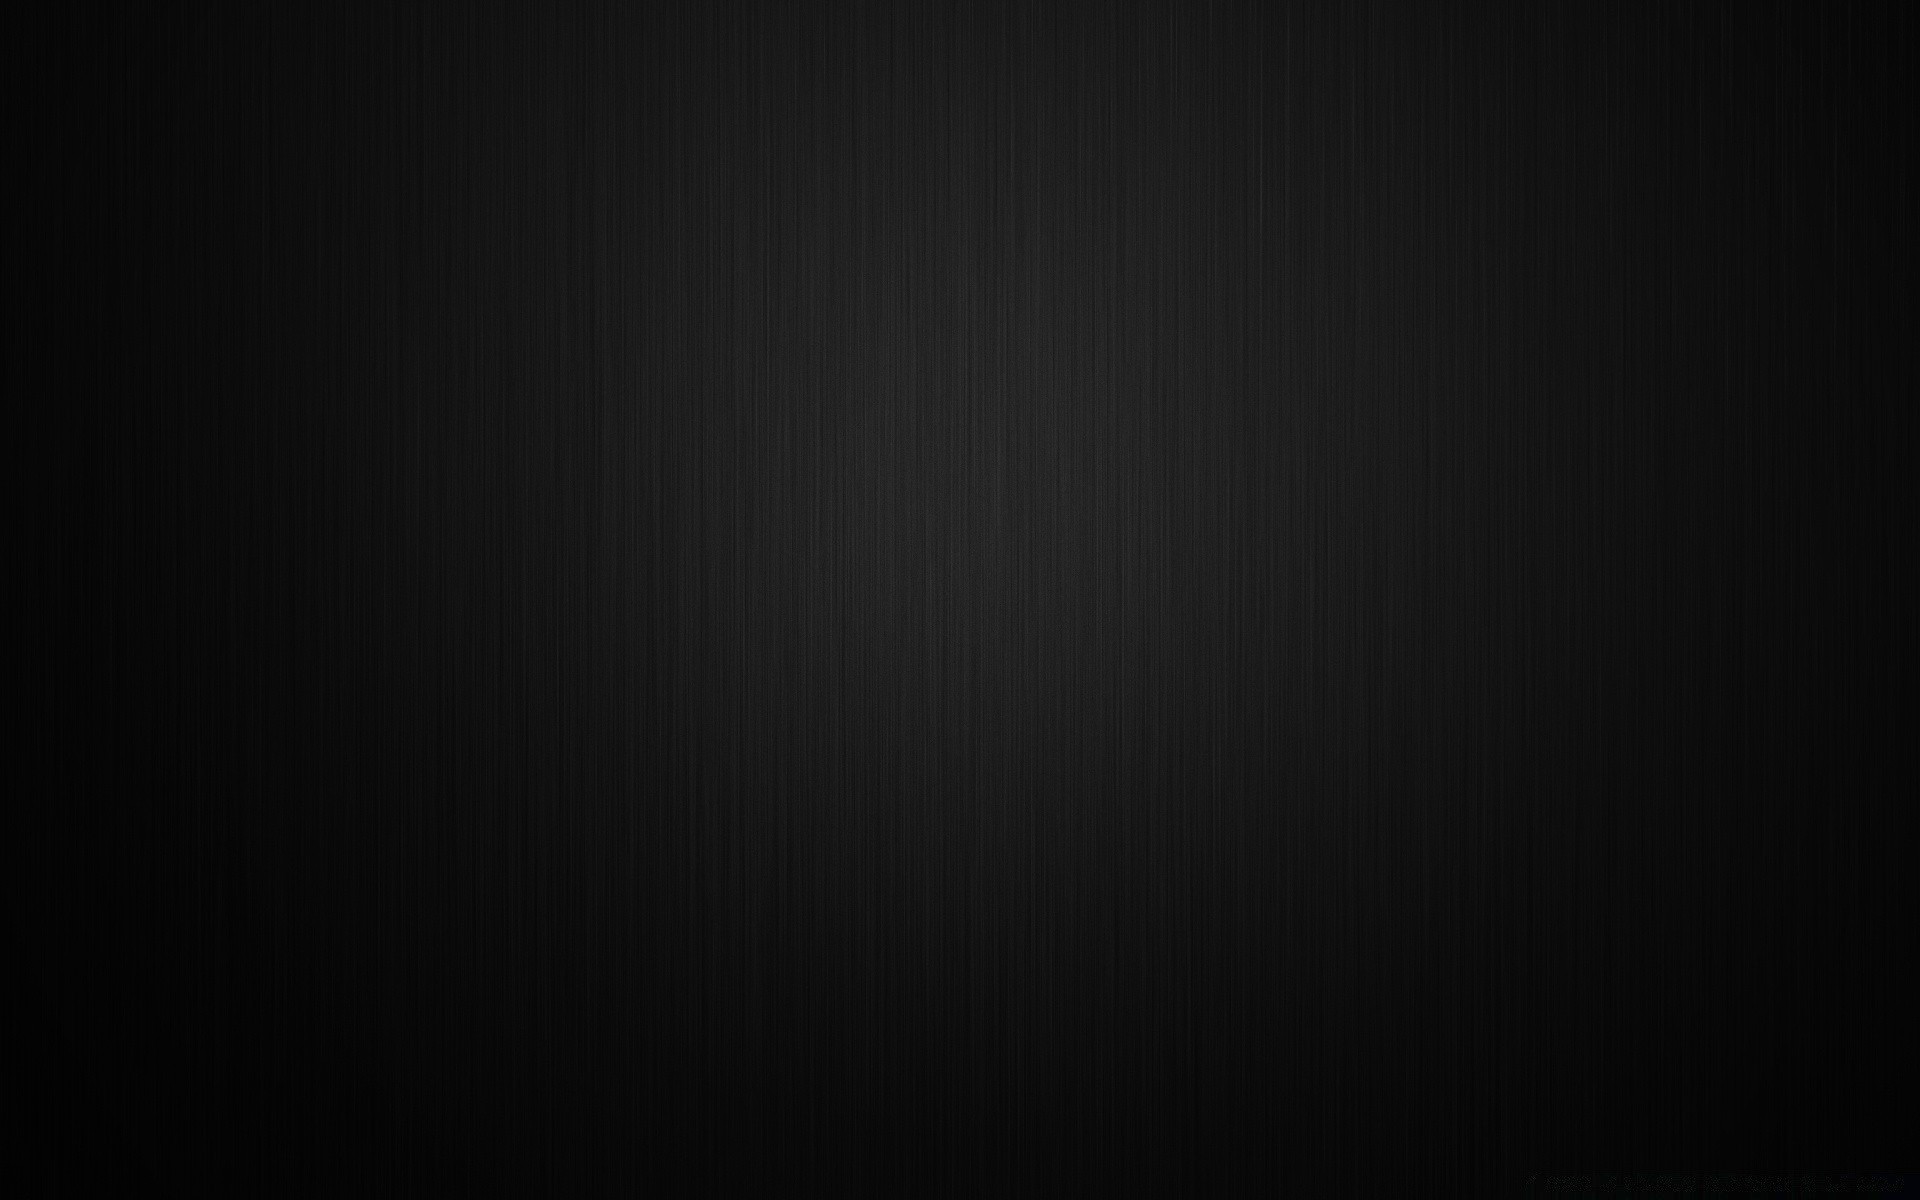 Black Background Hole Dirty. iPhone wallpapers for free.